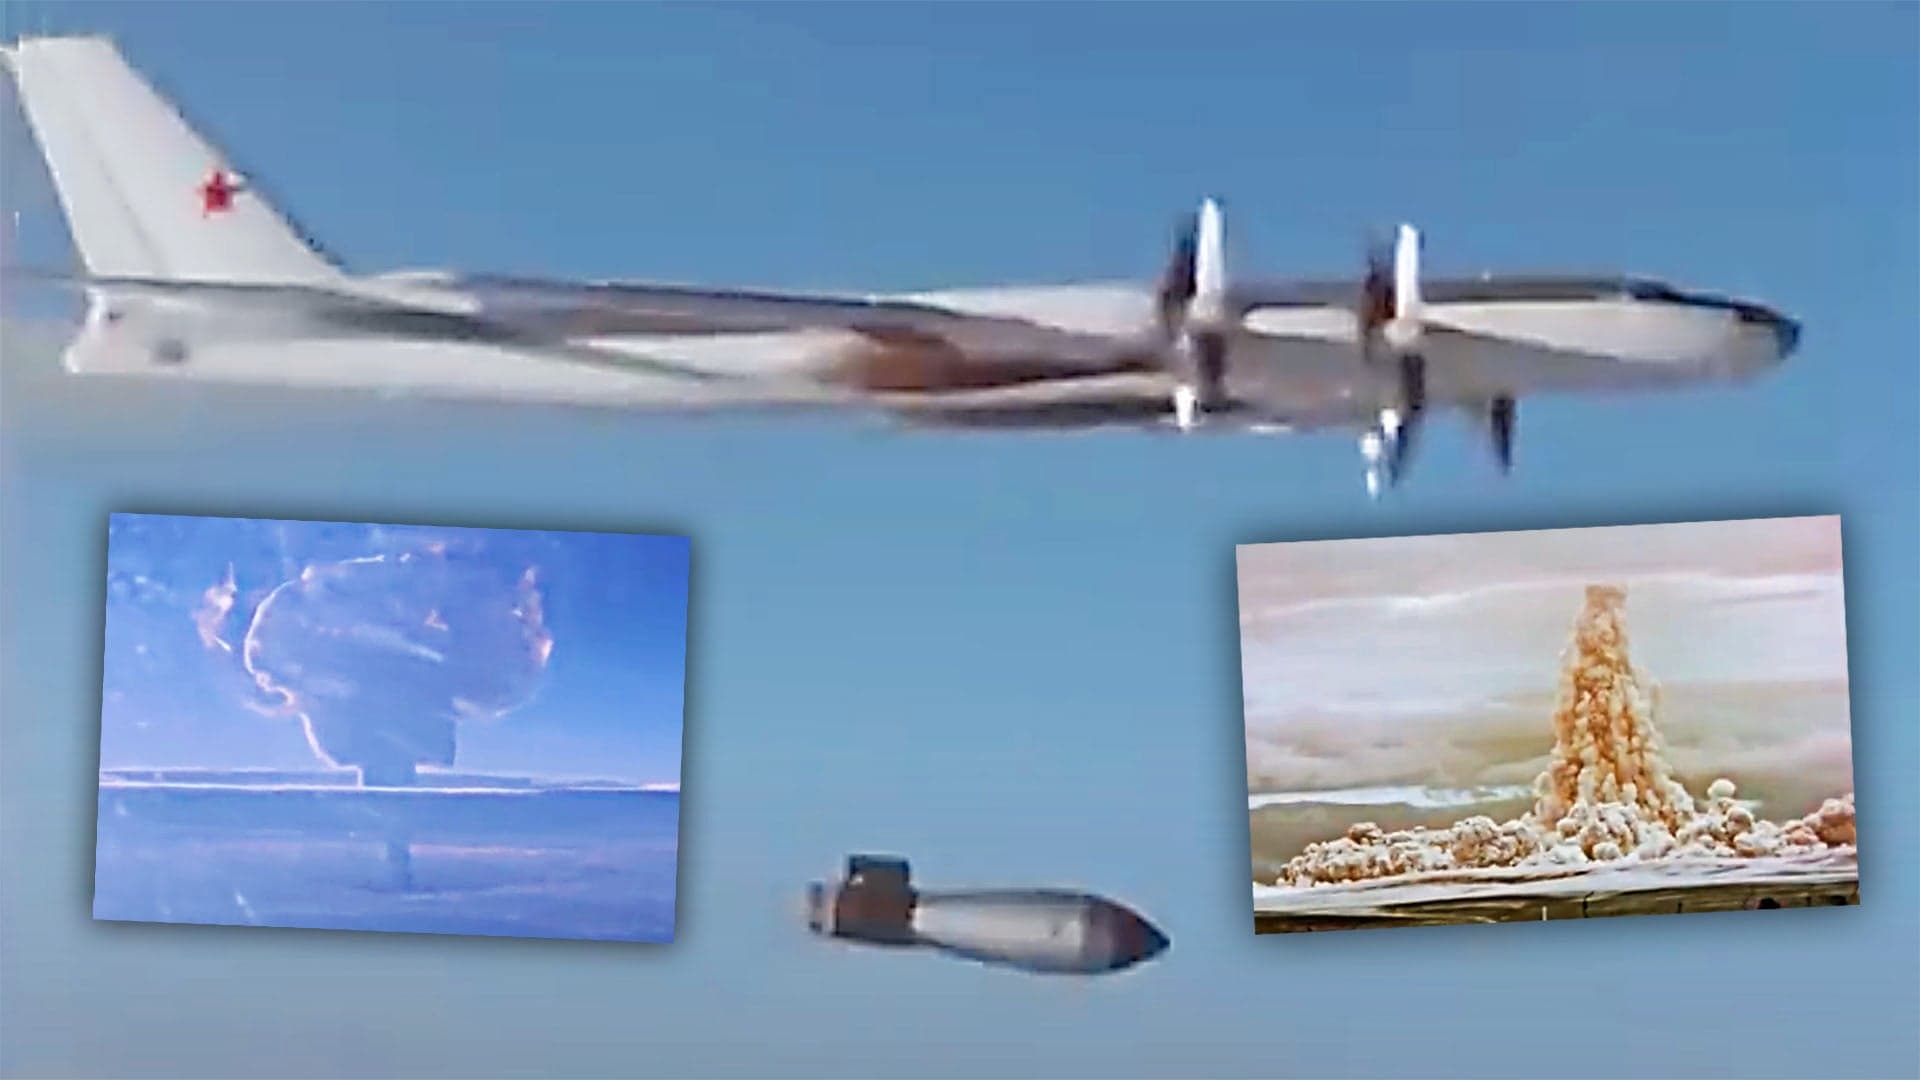 Russia Releases “Tsar Bomba” Test Footage Of The Most Powerful Nuclear Bomb Blast Ever